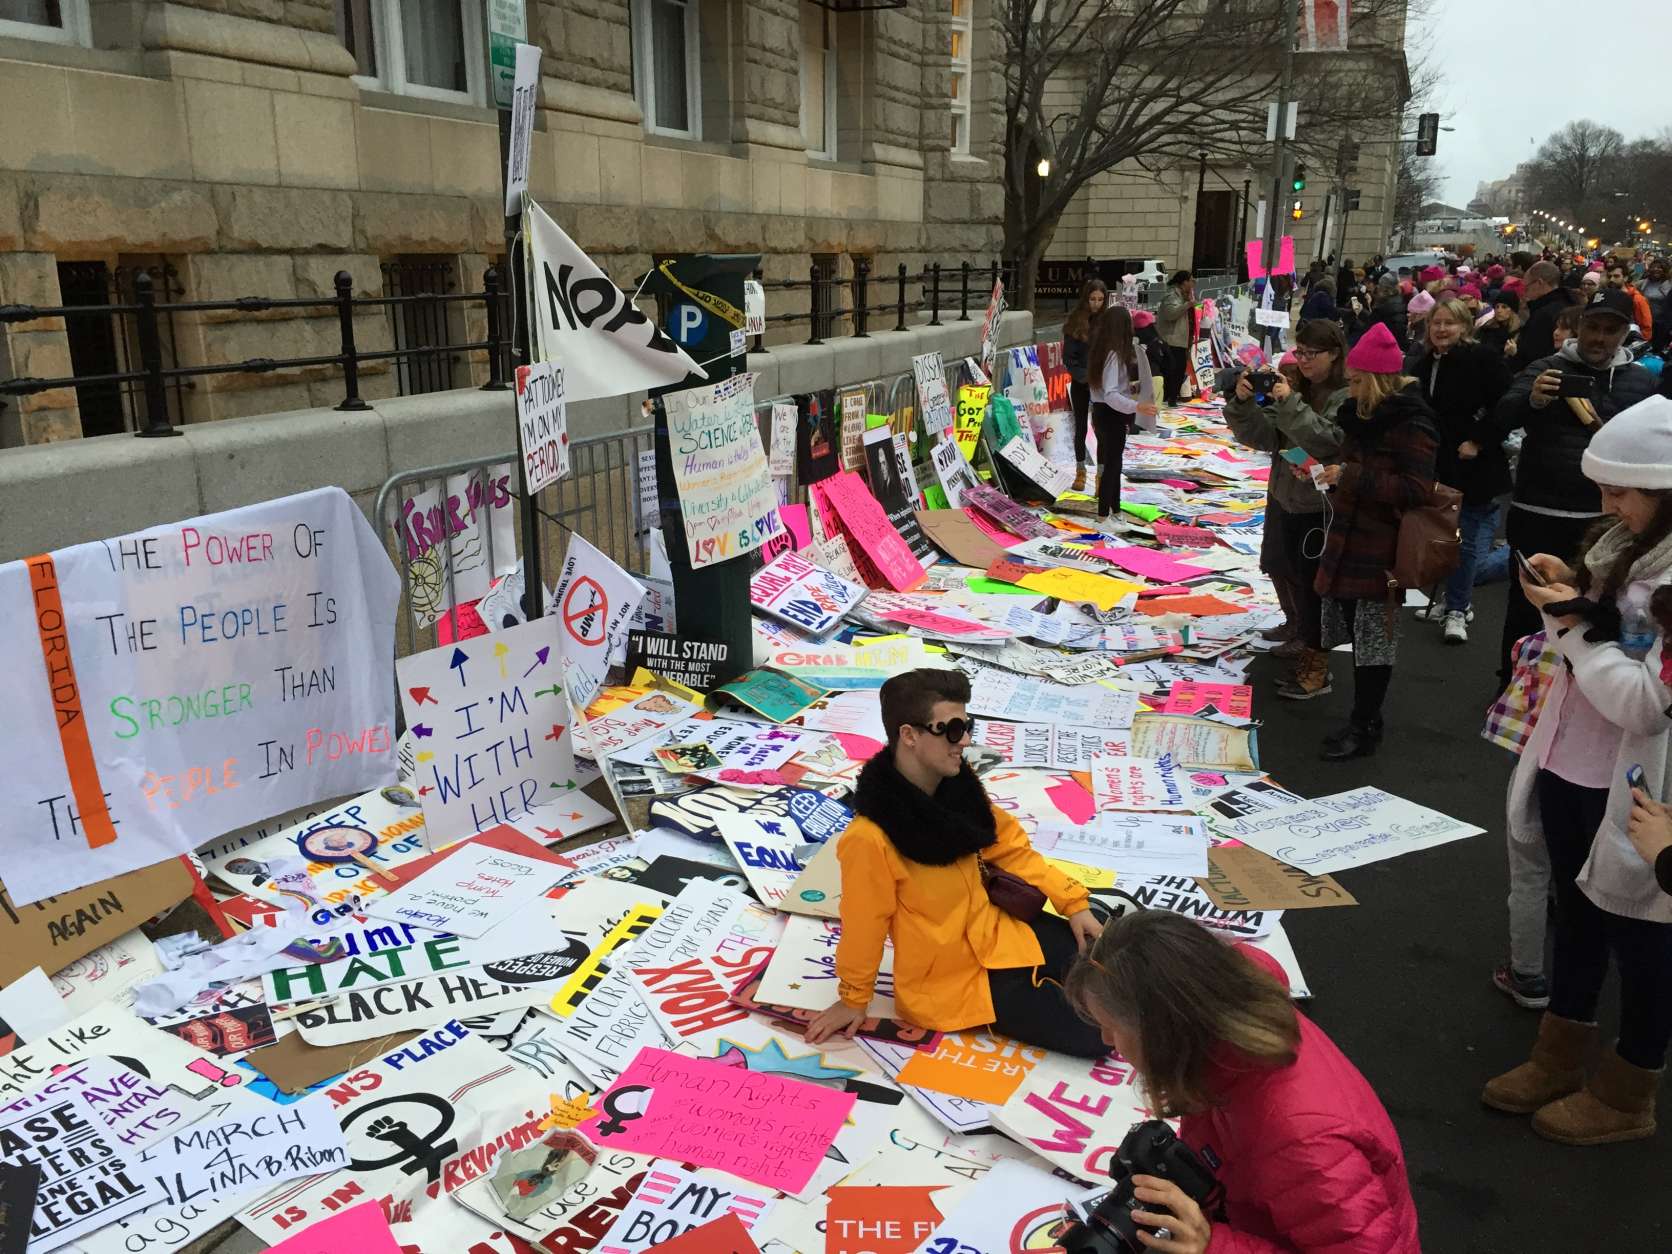 The scene outside Trump Hotel on Saturday, Jan. 21, 2017 during the Women's March on Washington. (WTOP/Judy Taub)